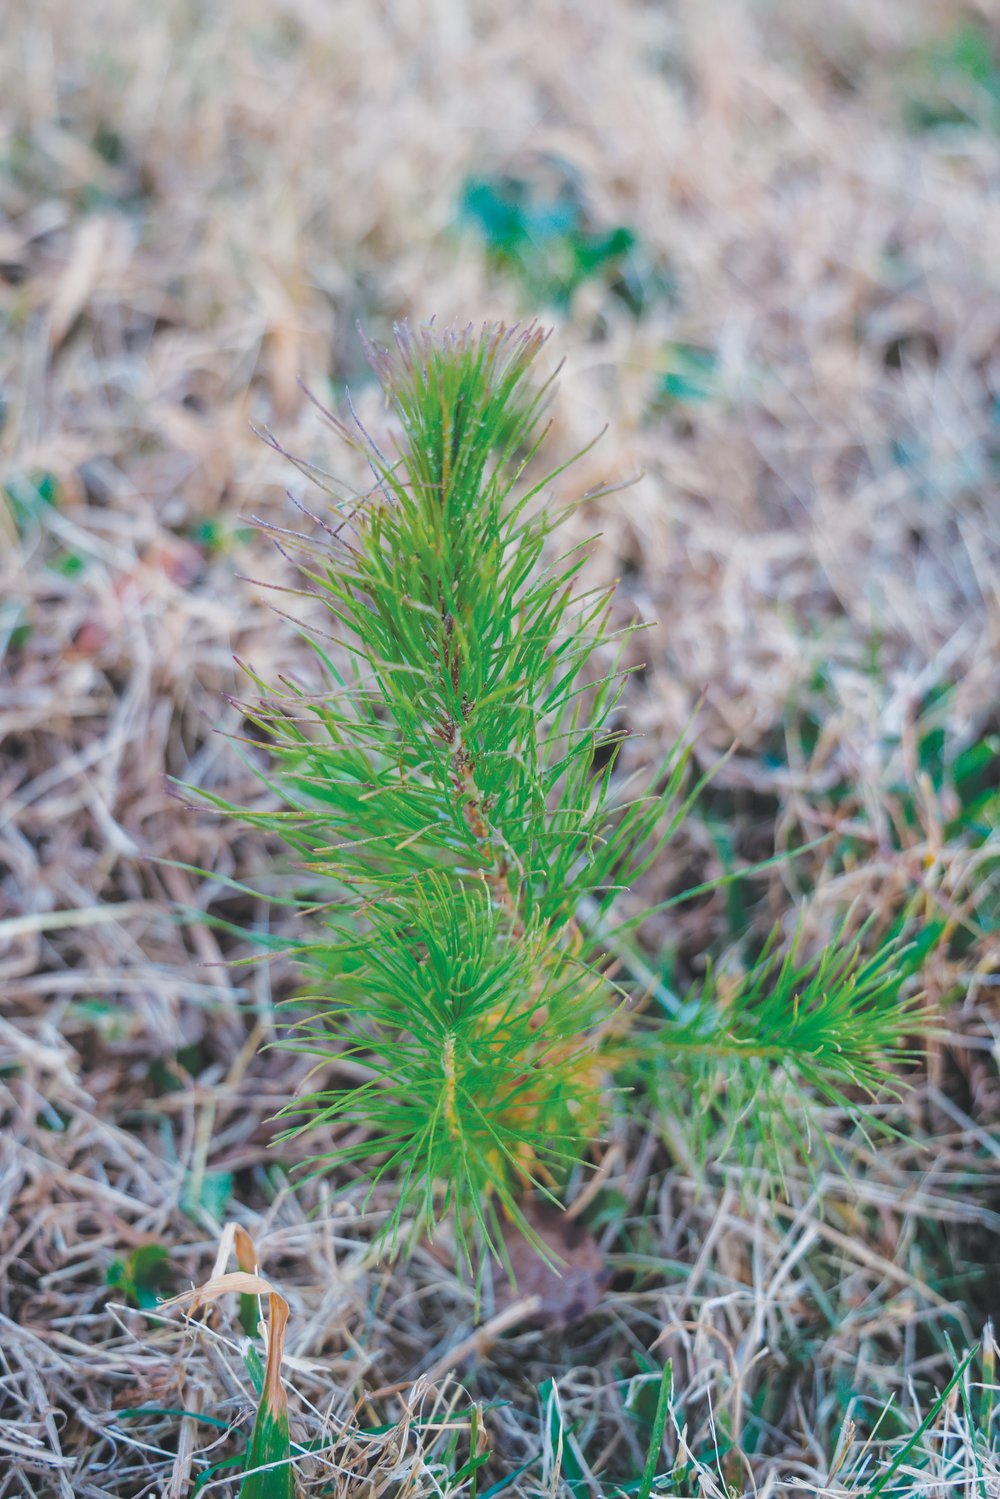 This sapling, planted at Phillips Farm in Pittsboro, will be ready to be sold as a Christmas tree in a few years.